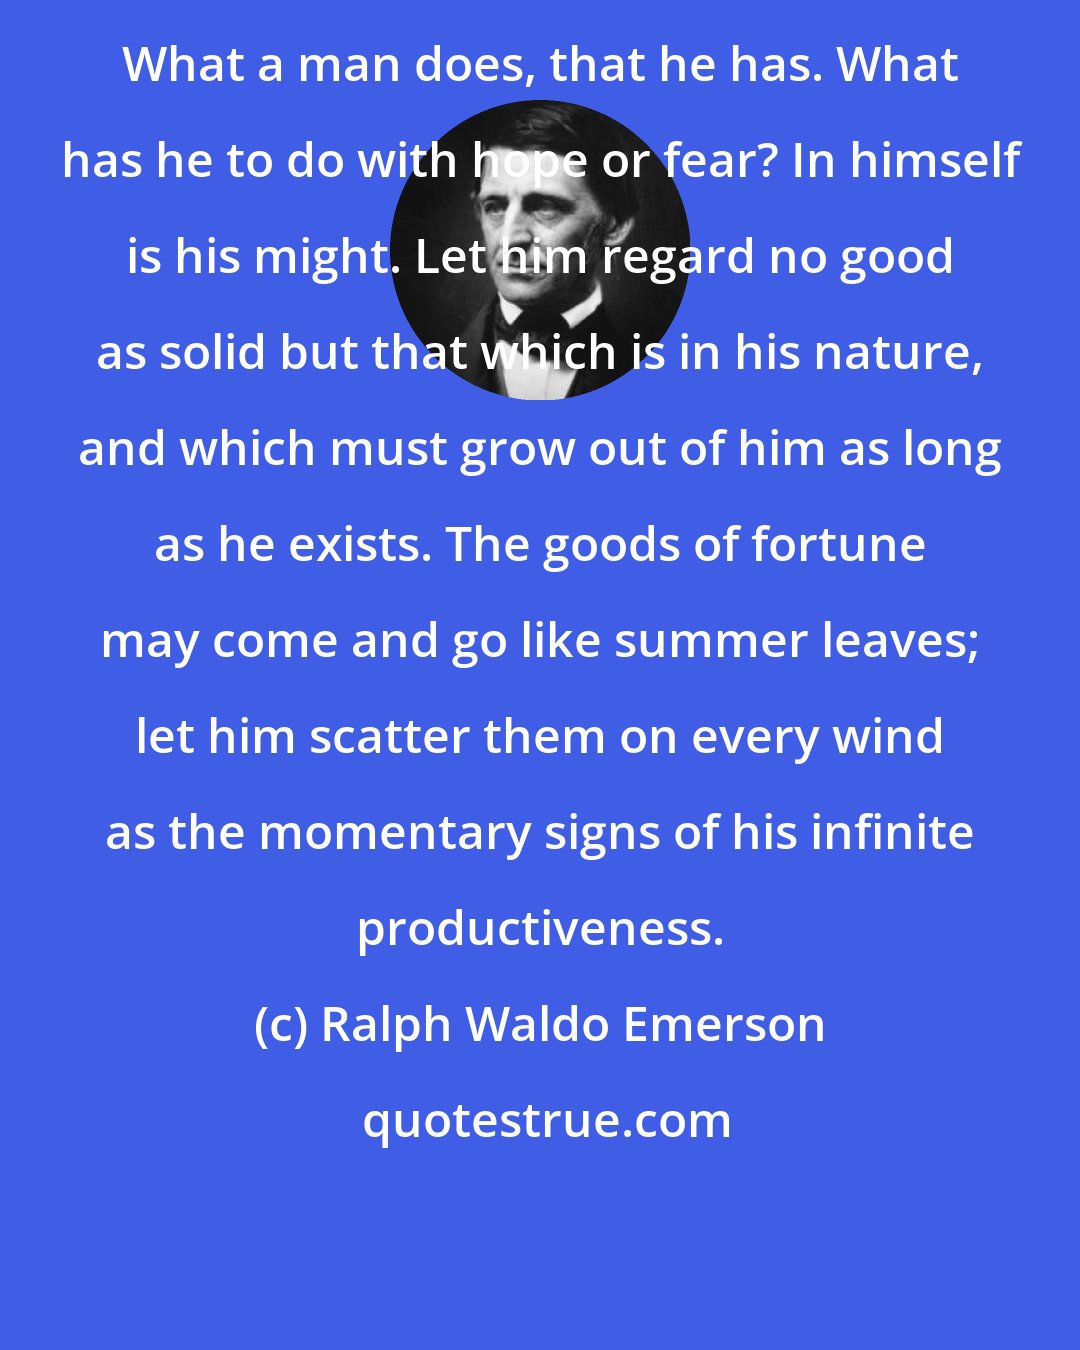 Ralph Waldo Emerson: What a man does, that he has. What has he to do with hope or fear? In himself is his might. Let him regard no good as solid but that which is in his nature, and which must grow out of him as long as he exists. The goods of fortune may come and go like summer leaves; let him scatter them on every wind as the momentary signs of his infinite productiveness.